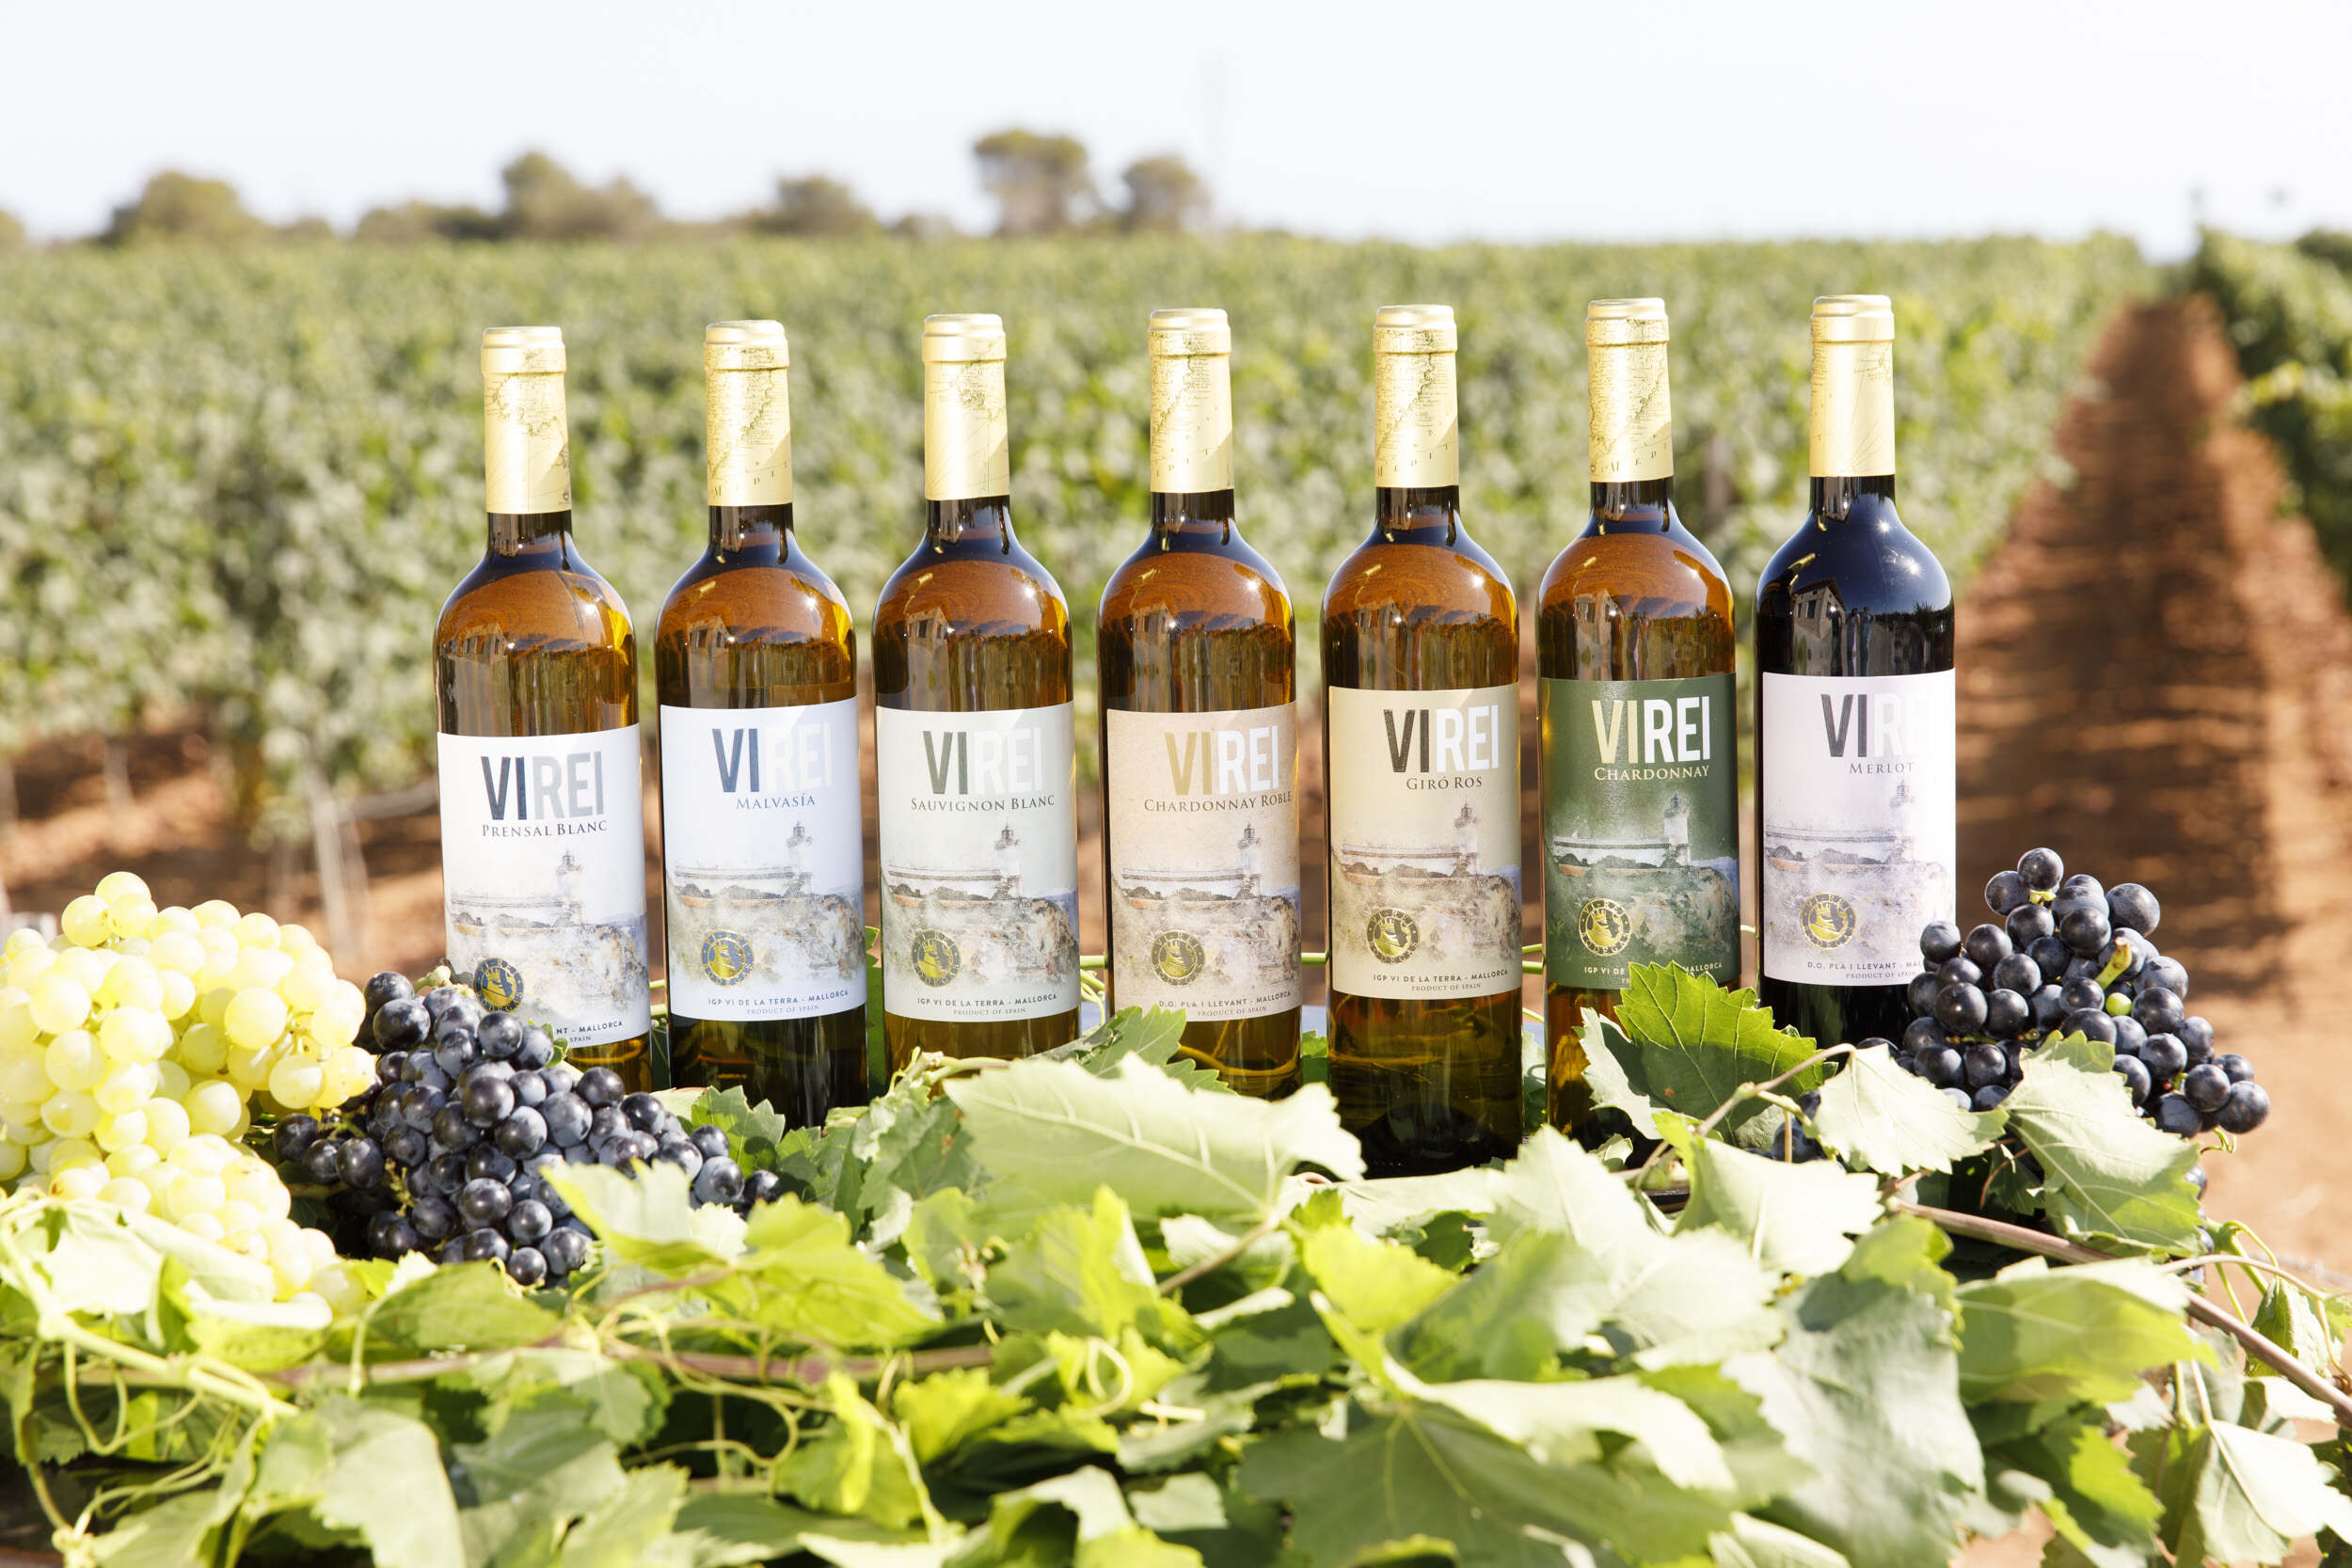 Several wines from Bodegas Vi Rei